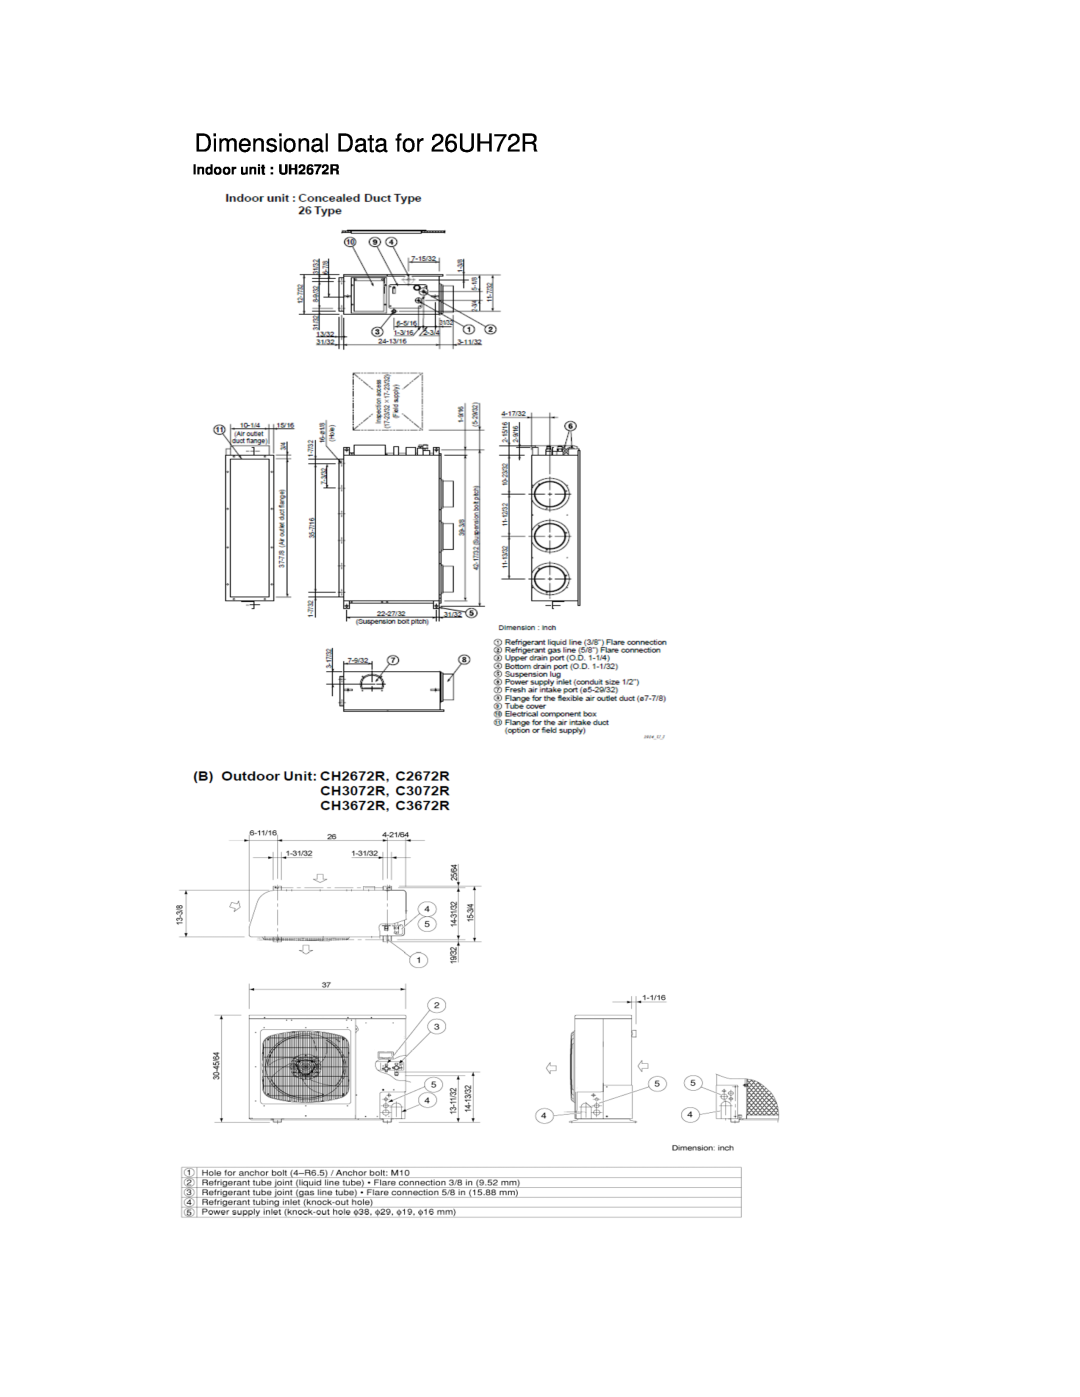 Sanyo manual Dimensional Data for 26UH72R, Indoor unit UH2672R 